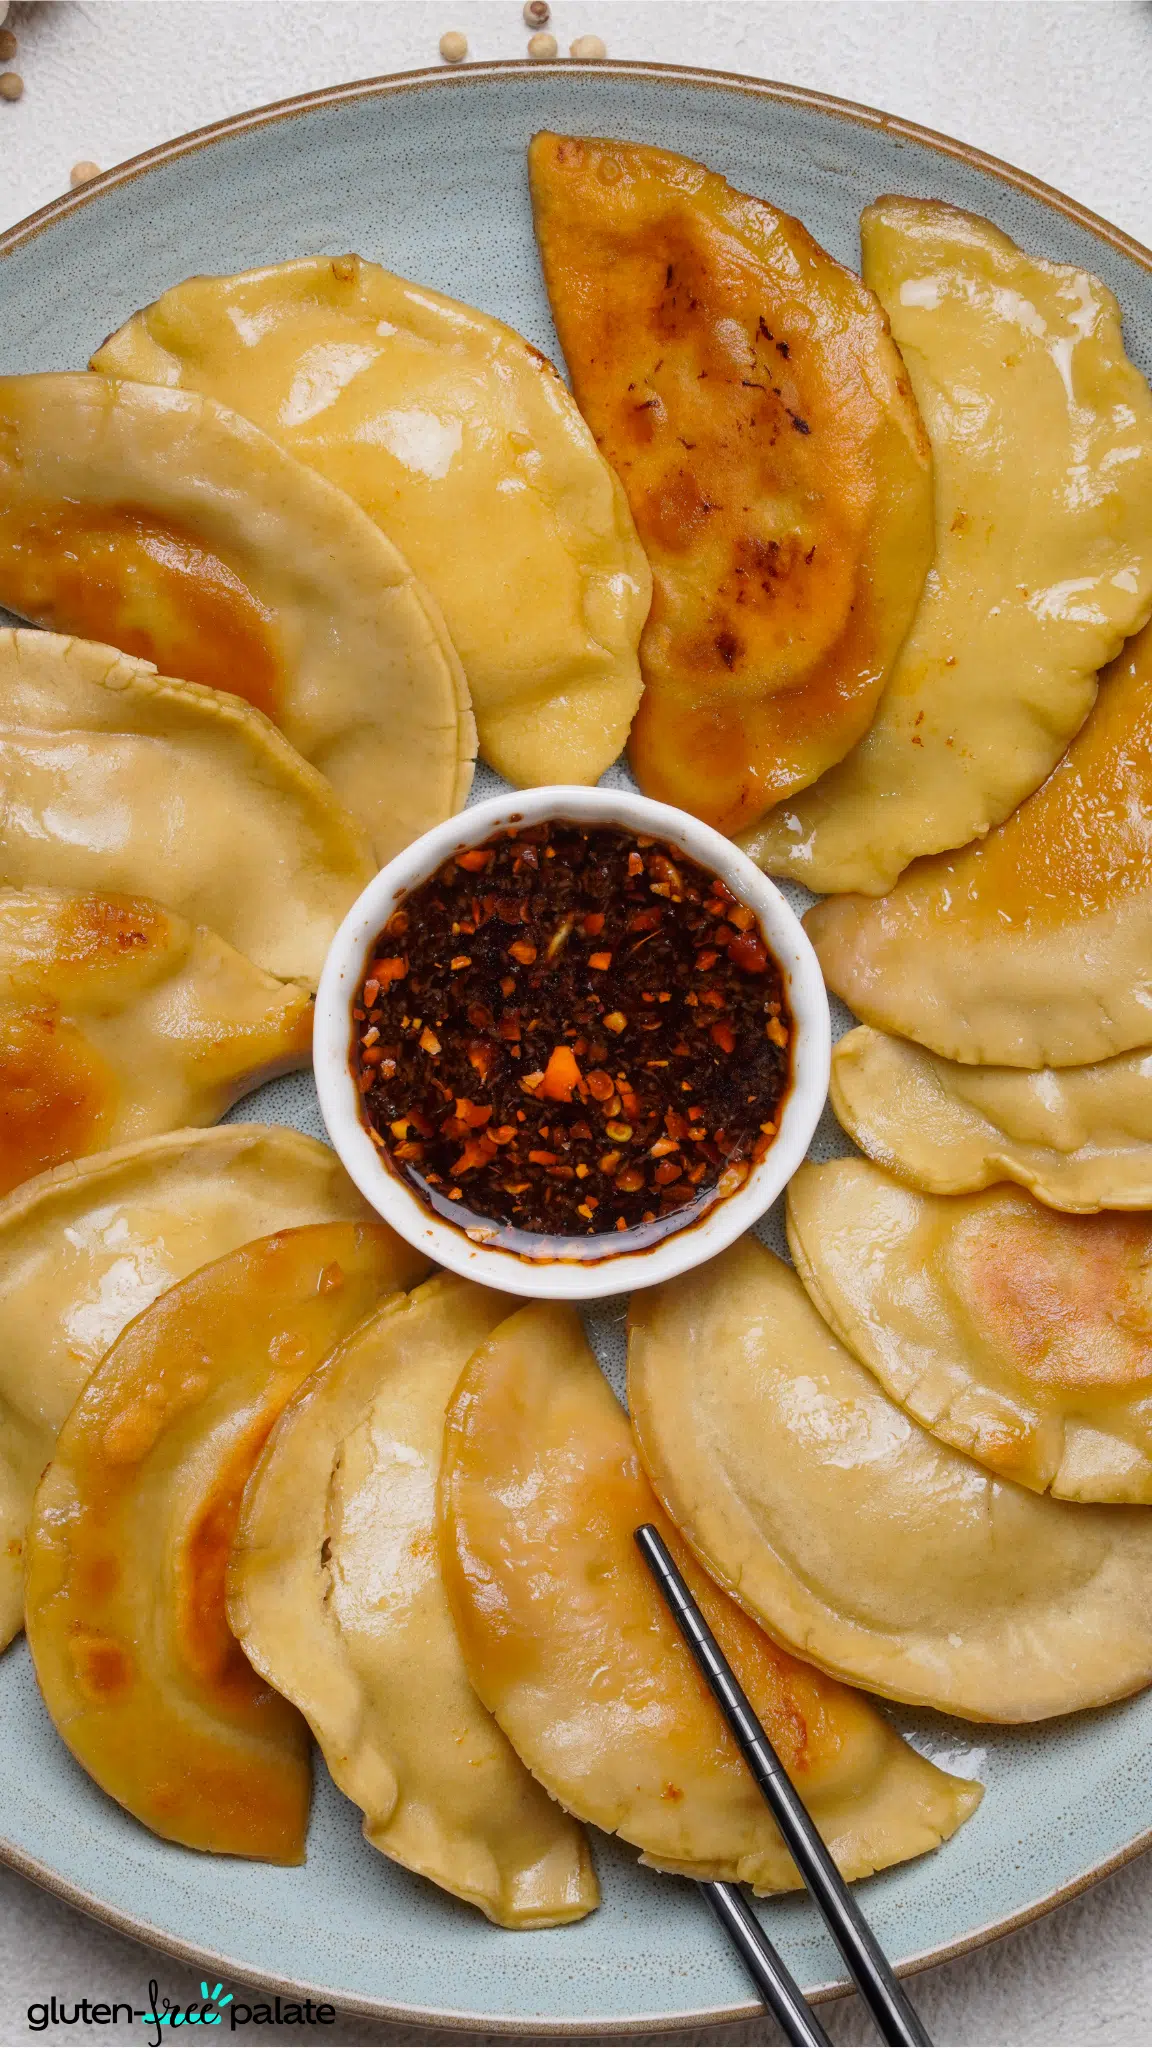 gluten-free potstickers in a white serving plate with sauce